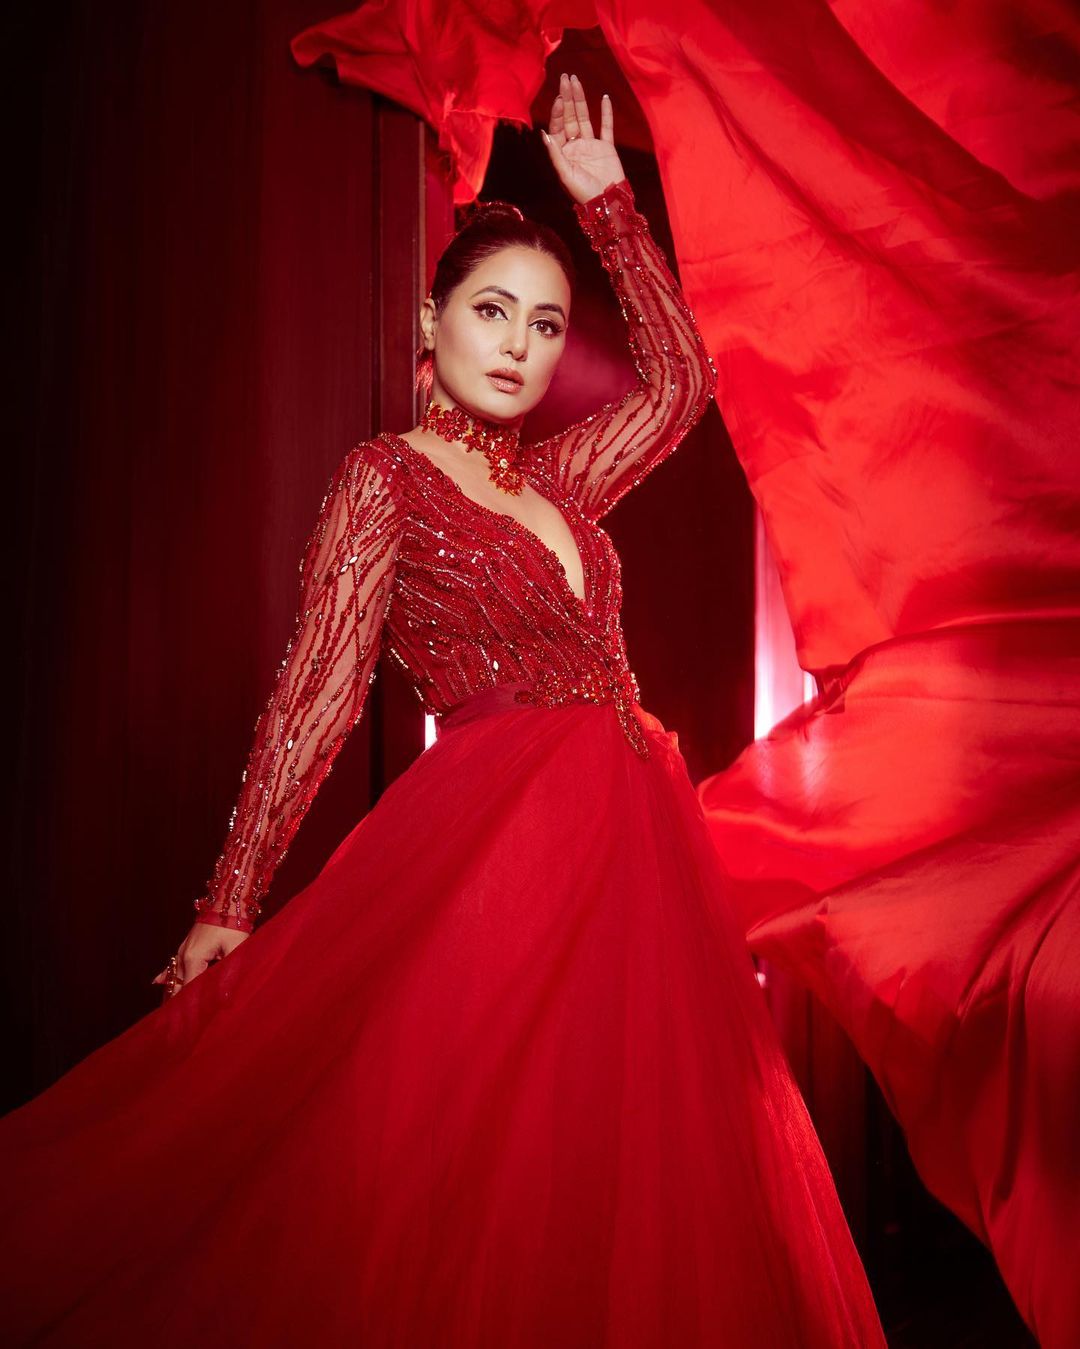  Hina Khan looks like a dream in a bright red embellished gown. (Image: Instagram)